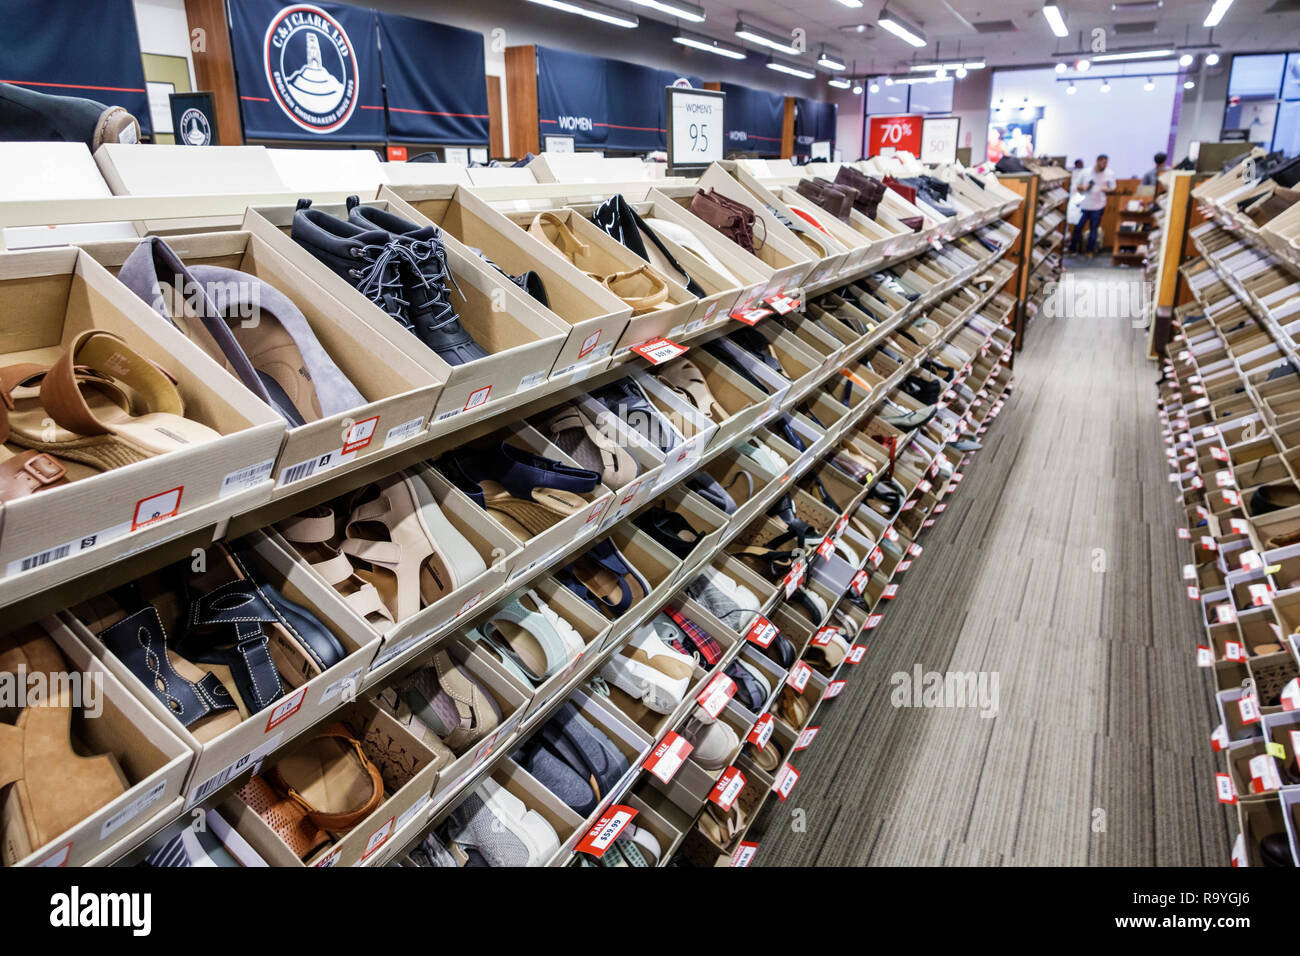 Fort Ft. Lauderdale Florida,Sunrise,Sawgrass Mills mall,Clarks Bostonian  Outlet,shoes,display sale,boxes,FL181222039 Stock Photo - Alamy